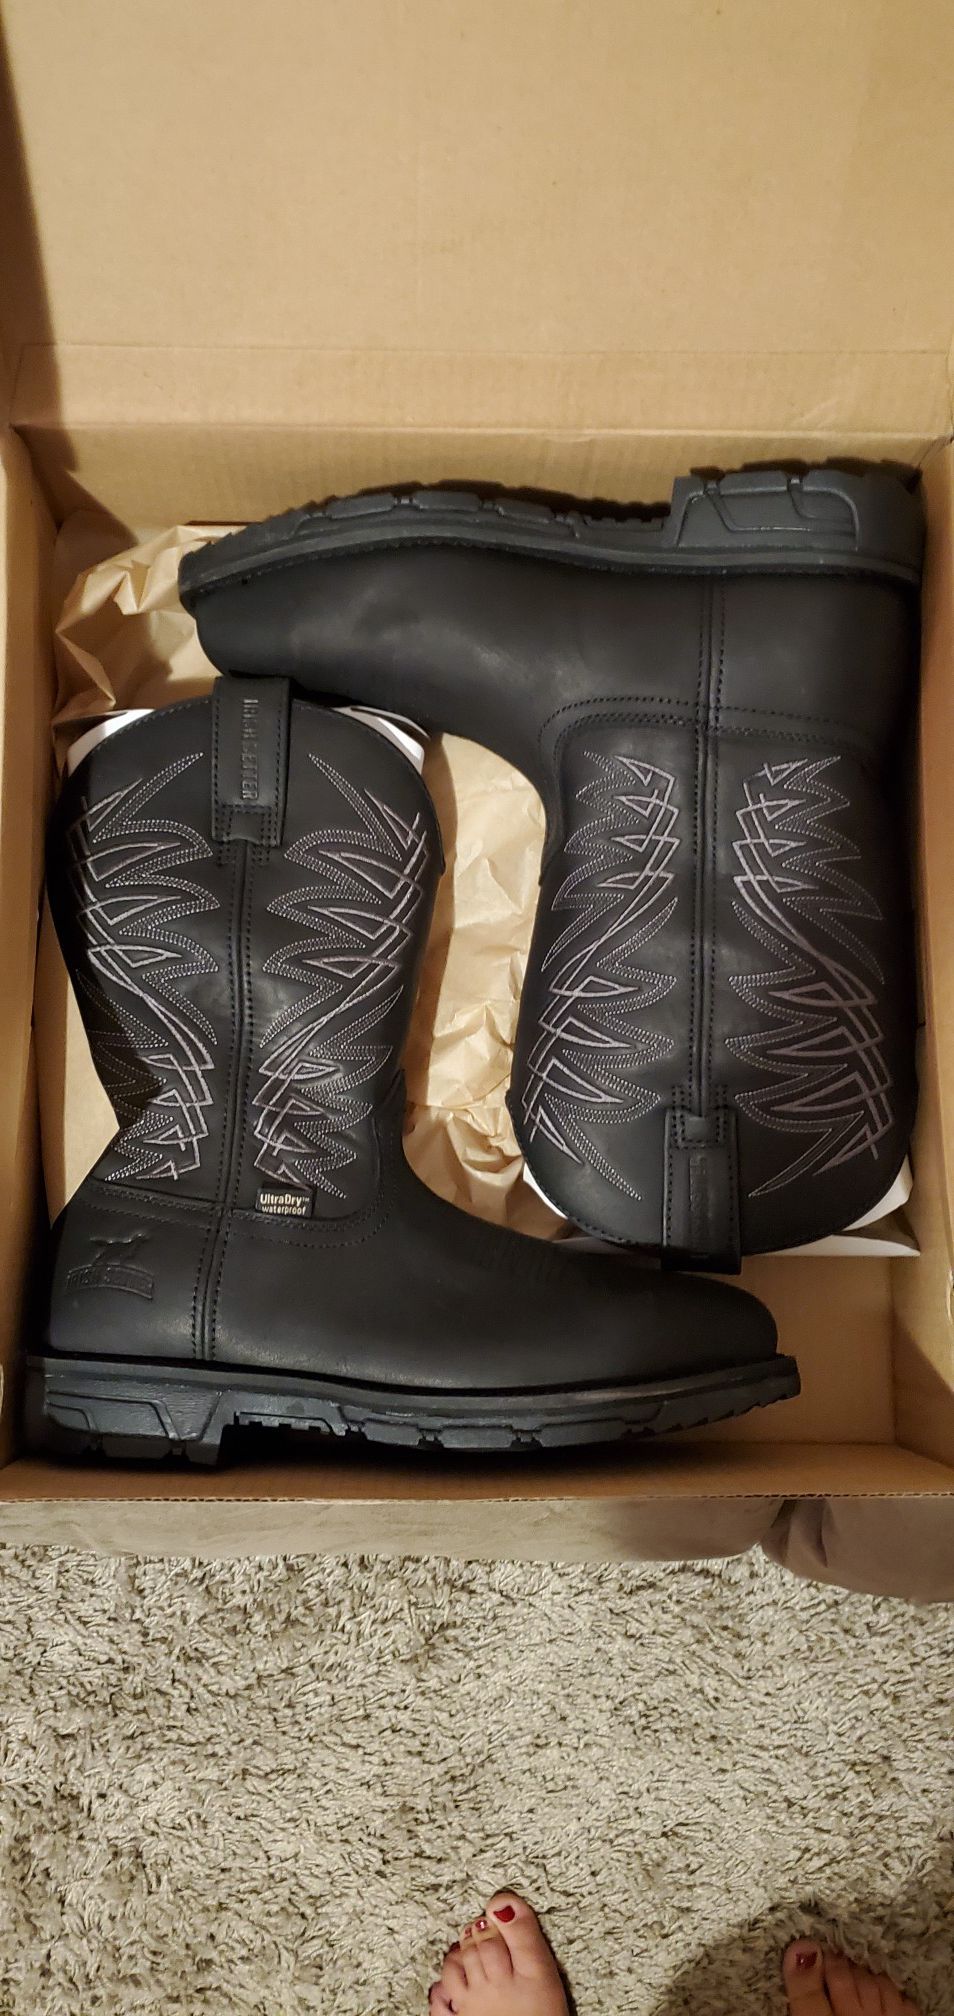 New in Box Boots